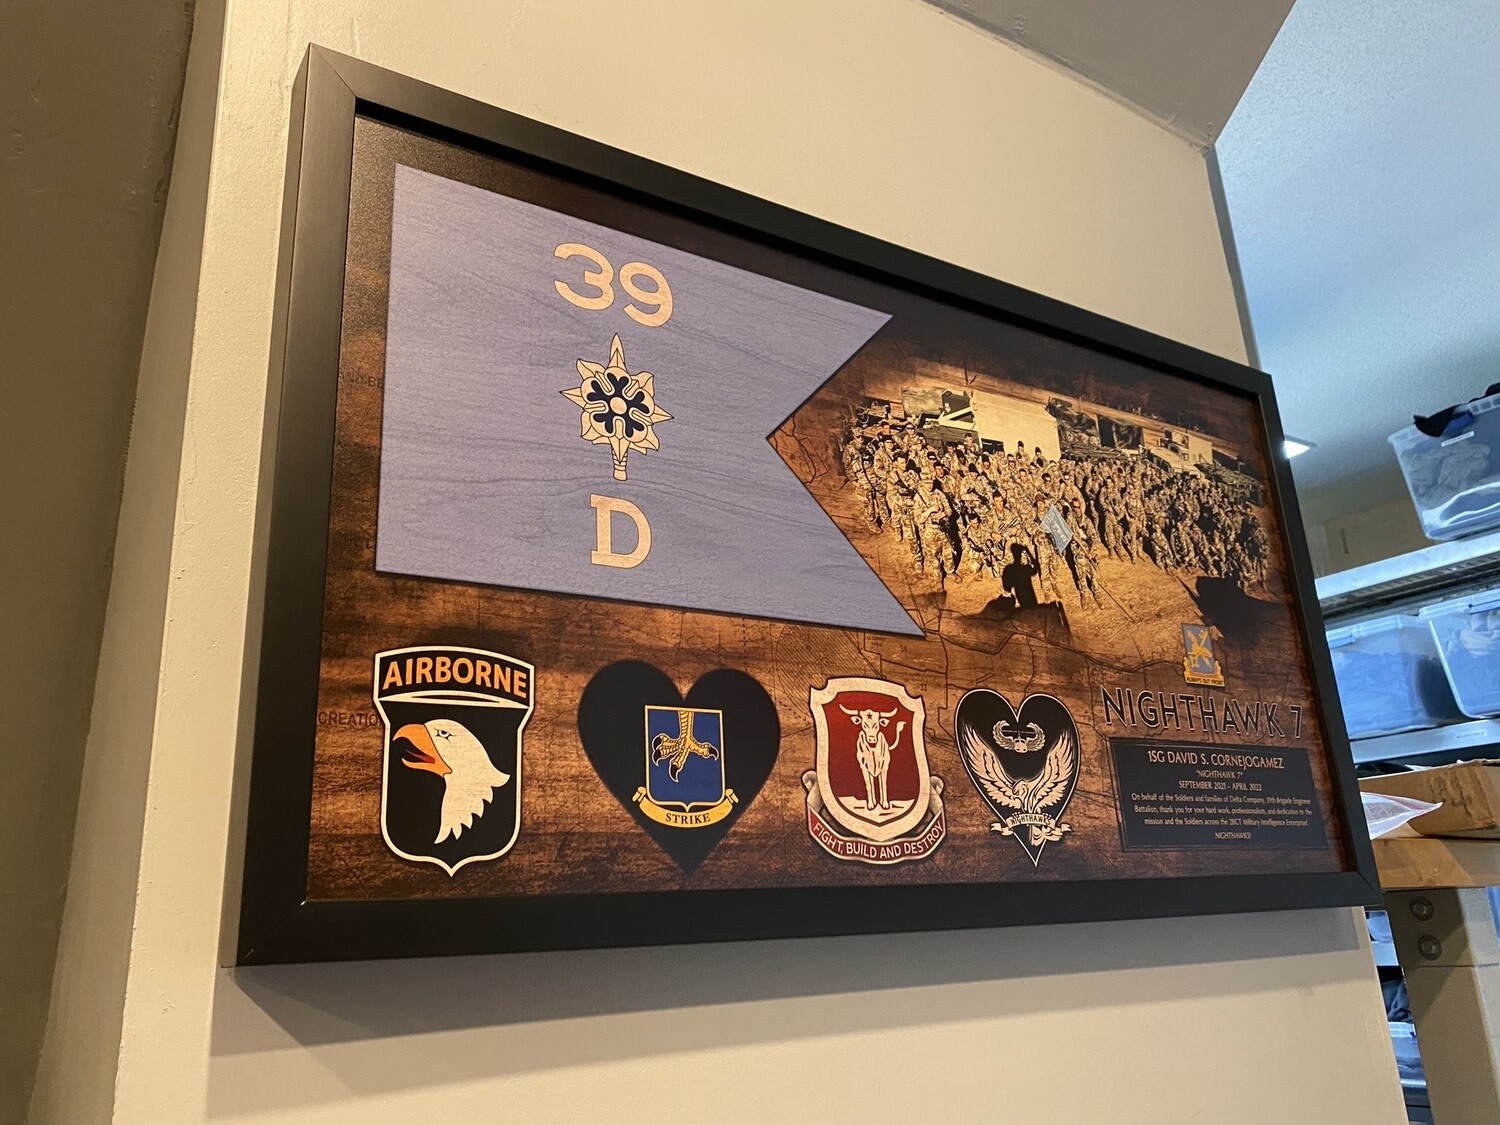 D Co 39 BEB "Nighthawks" Guidon and Photo Plaque - 28.25"x15.25"